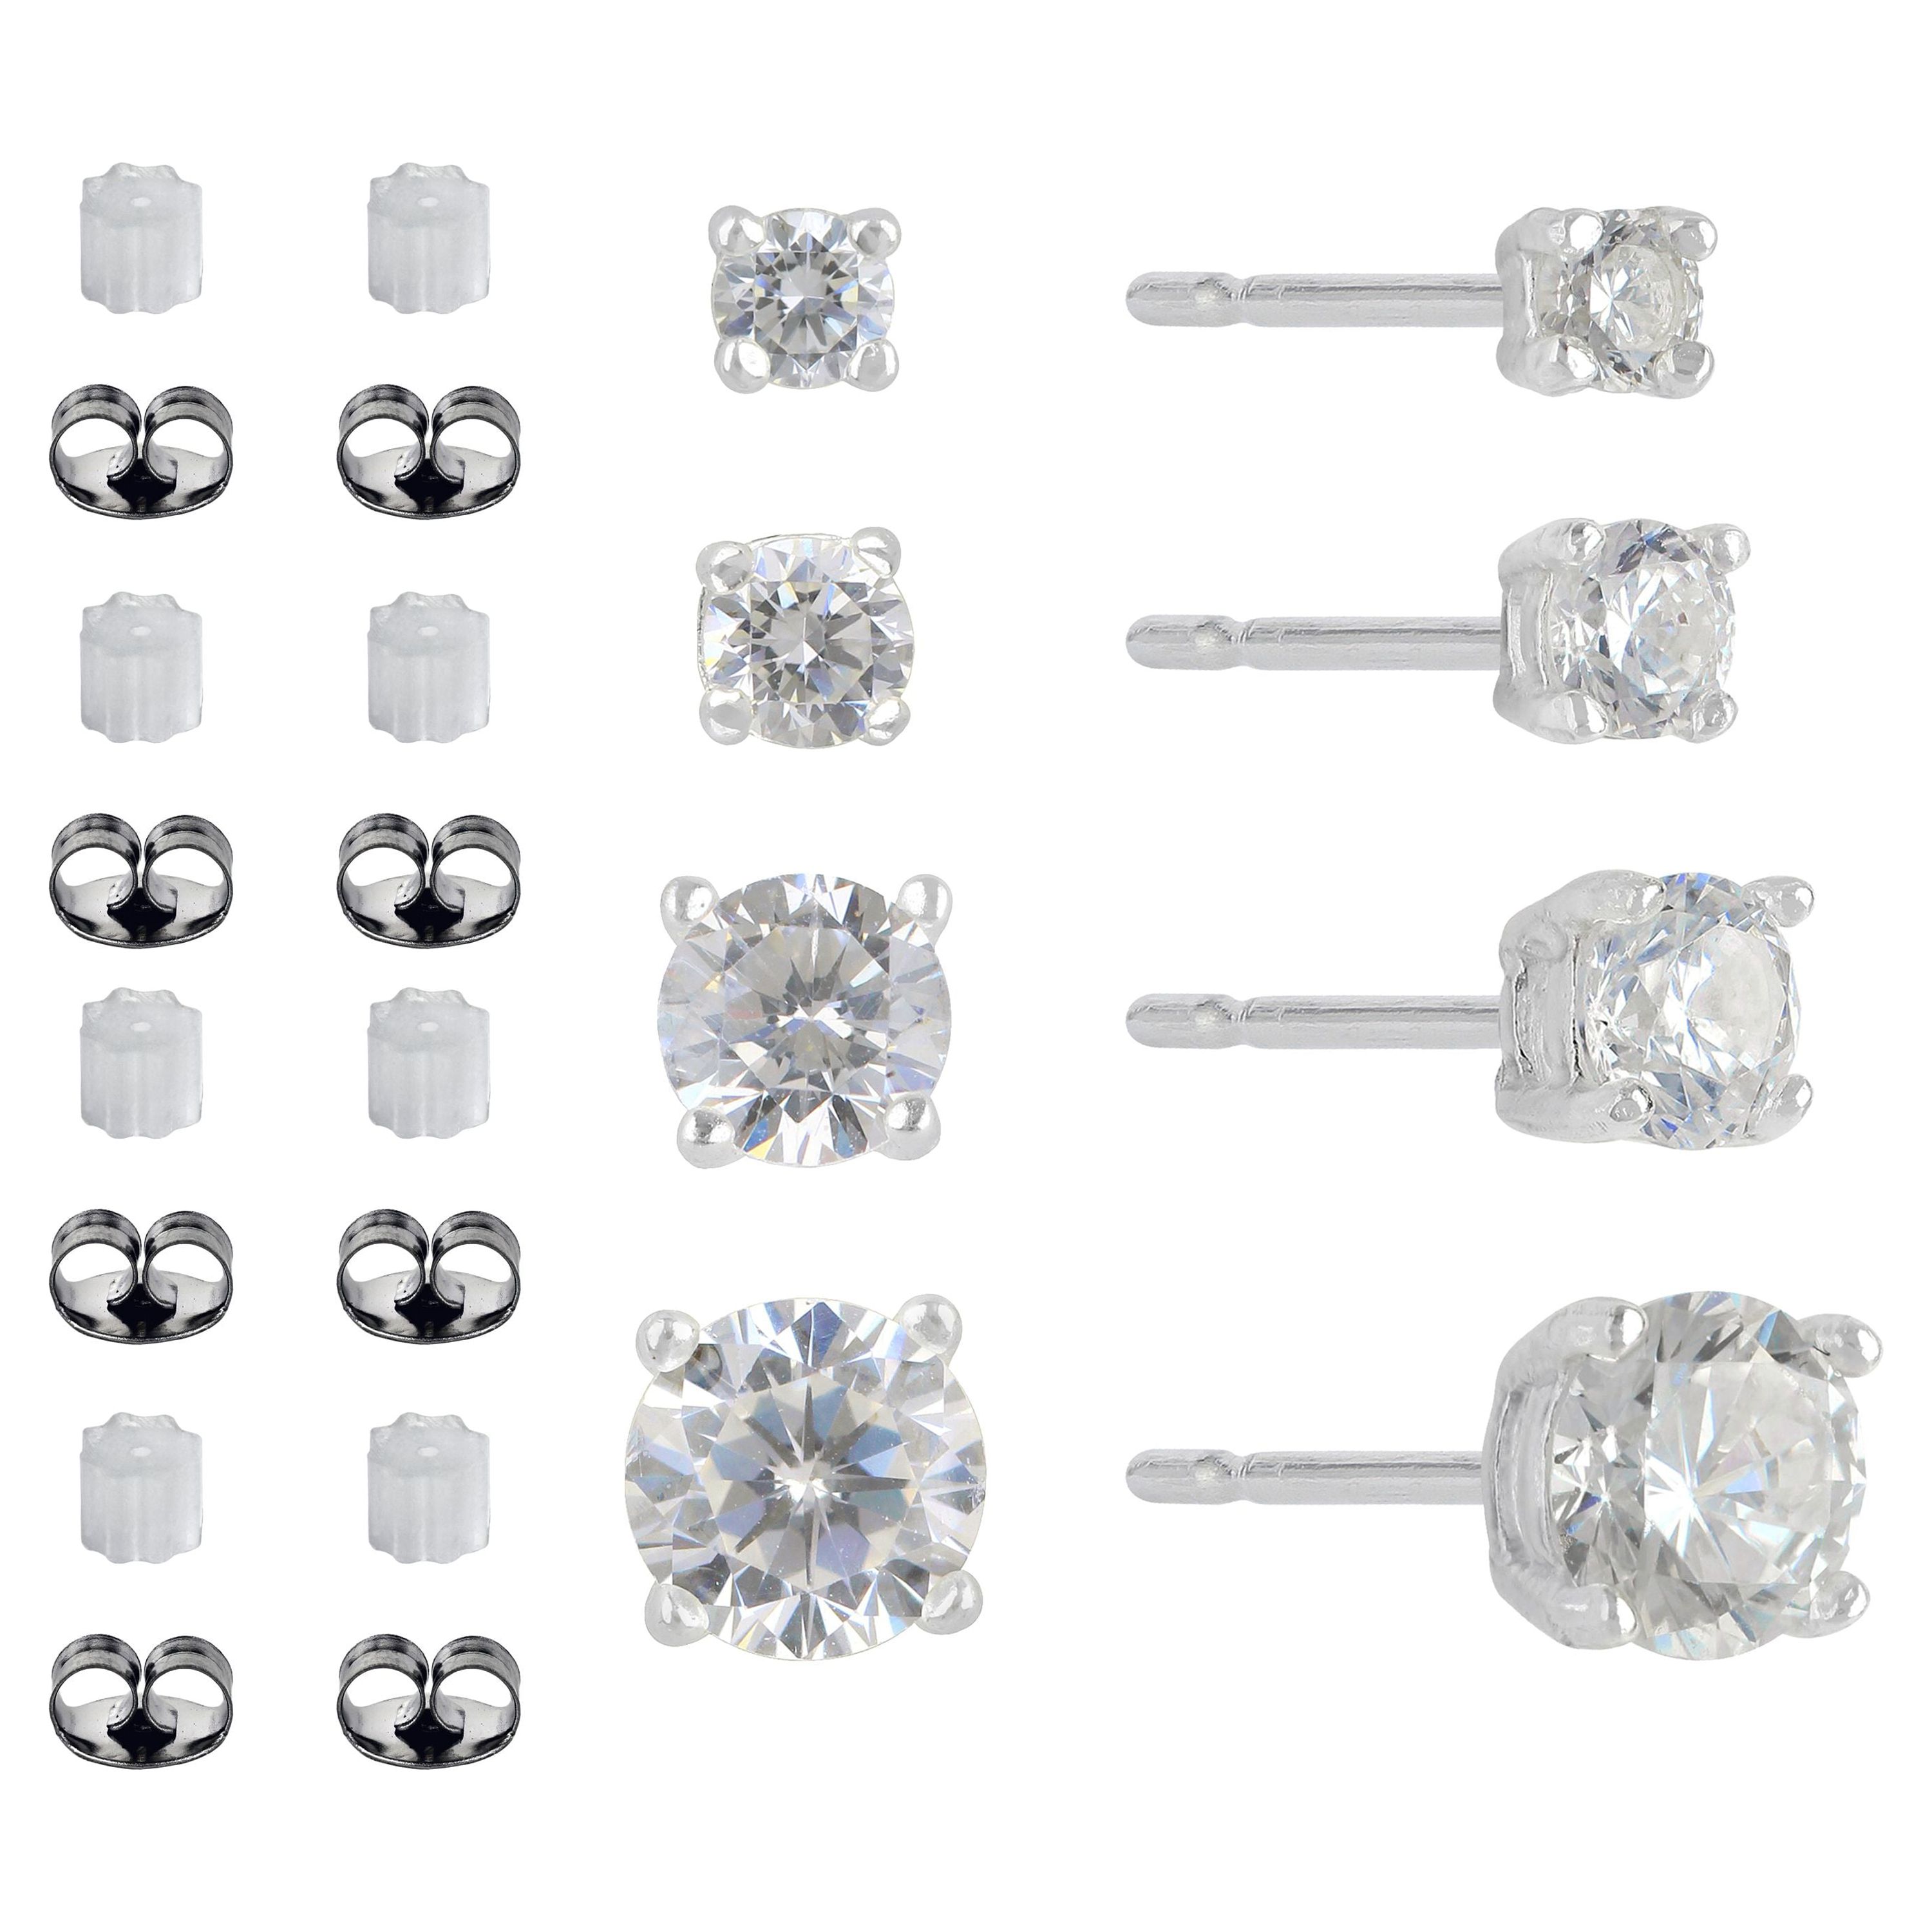 Brilliance Fine Jewelry Women's Simulated Diamond 4 Pair Round Earrings in Sterling Silver - image 3 of 3